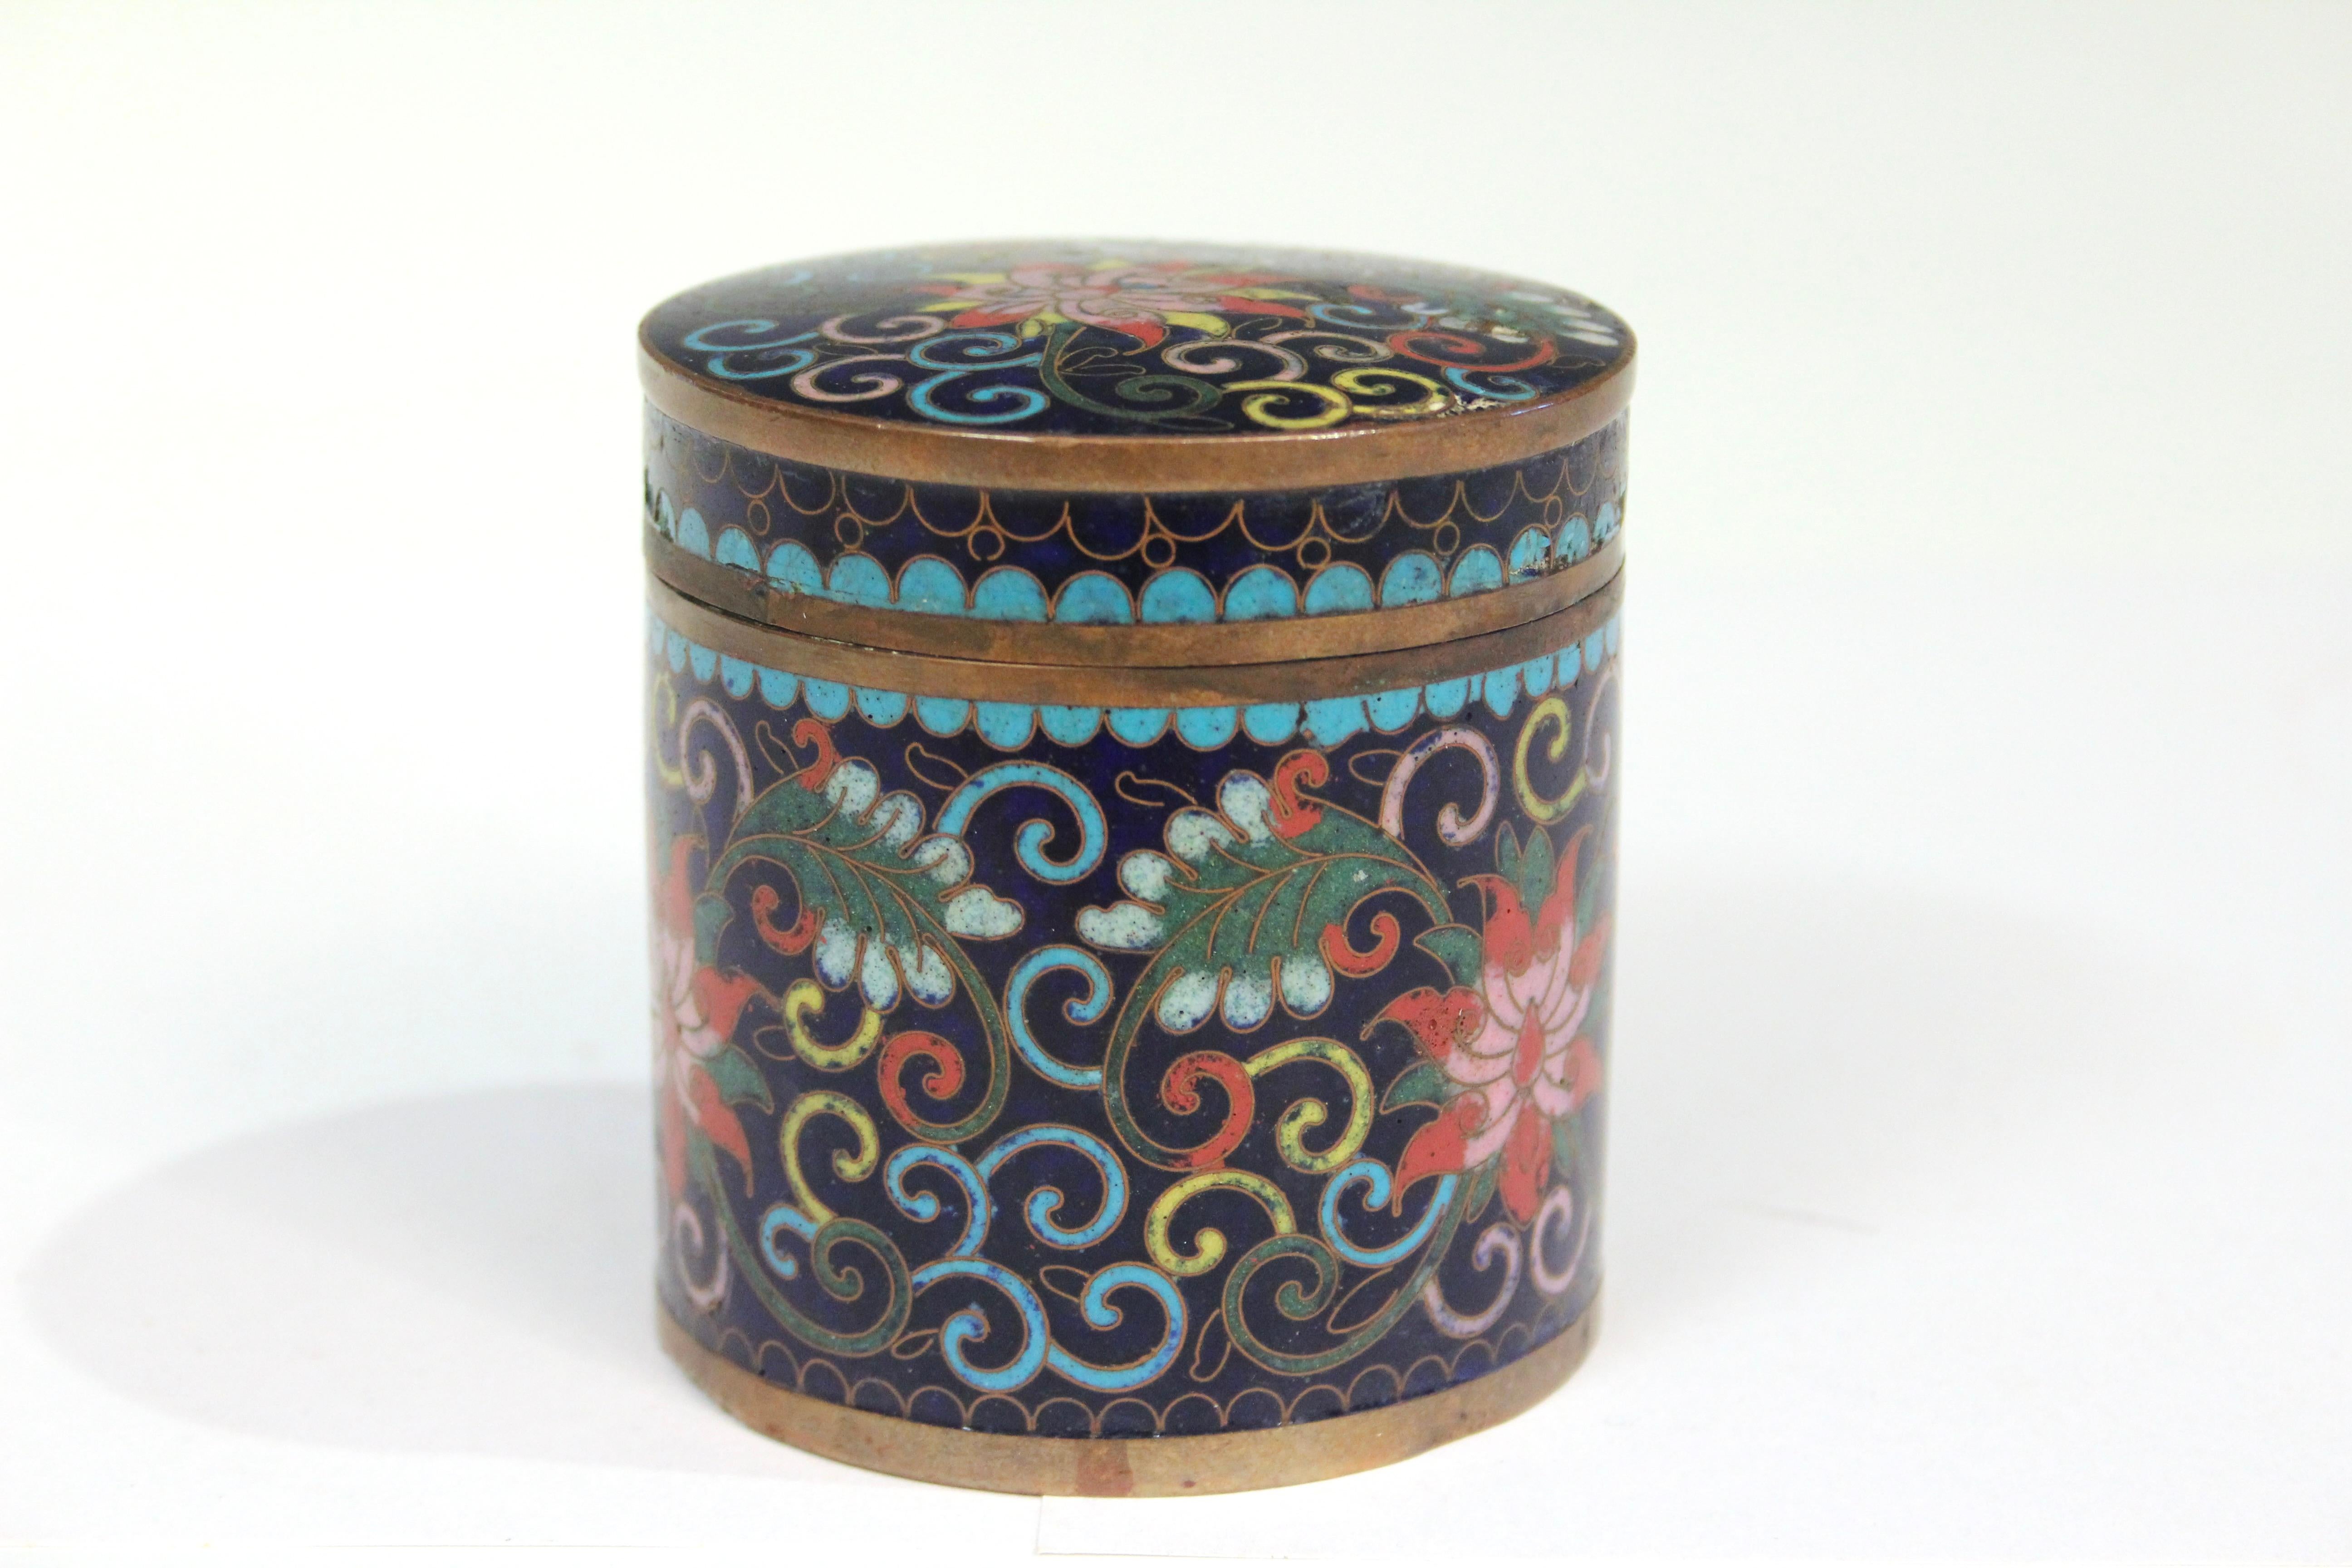 Antique Chinese cloisonne cannister with cover. Decorated with lotus flowers and scrolls in nice detail with great color and blending qualities. Tight fitting cover. Circa mid 19th century. 3 1/4